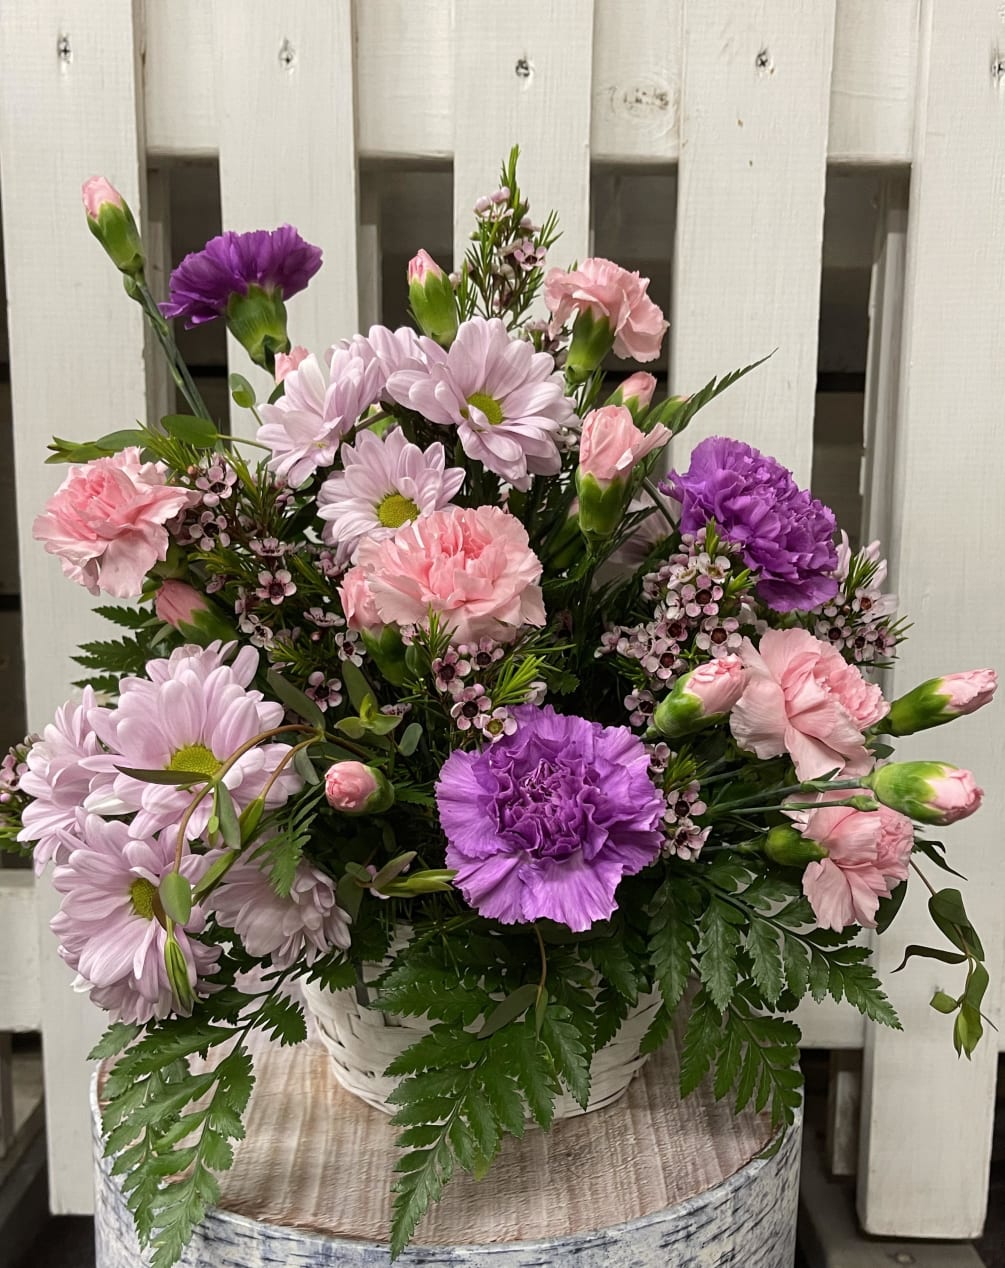 A sweet little basket of blooms in pastels.
We will occasionally need to